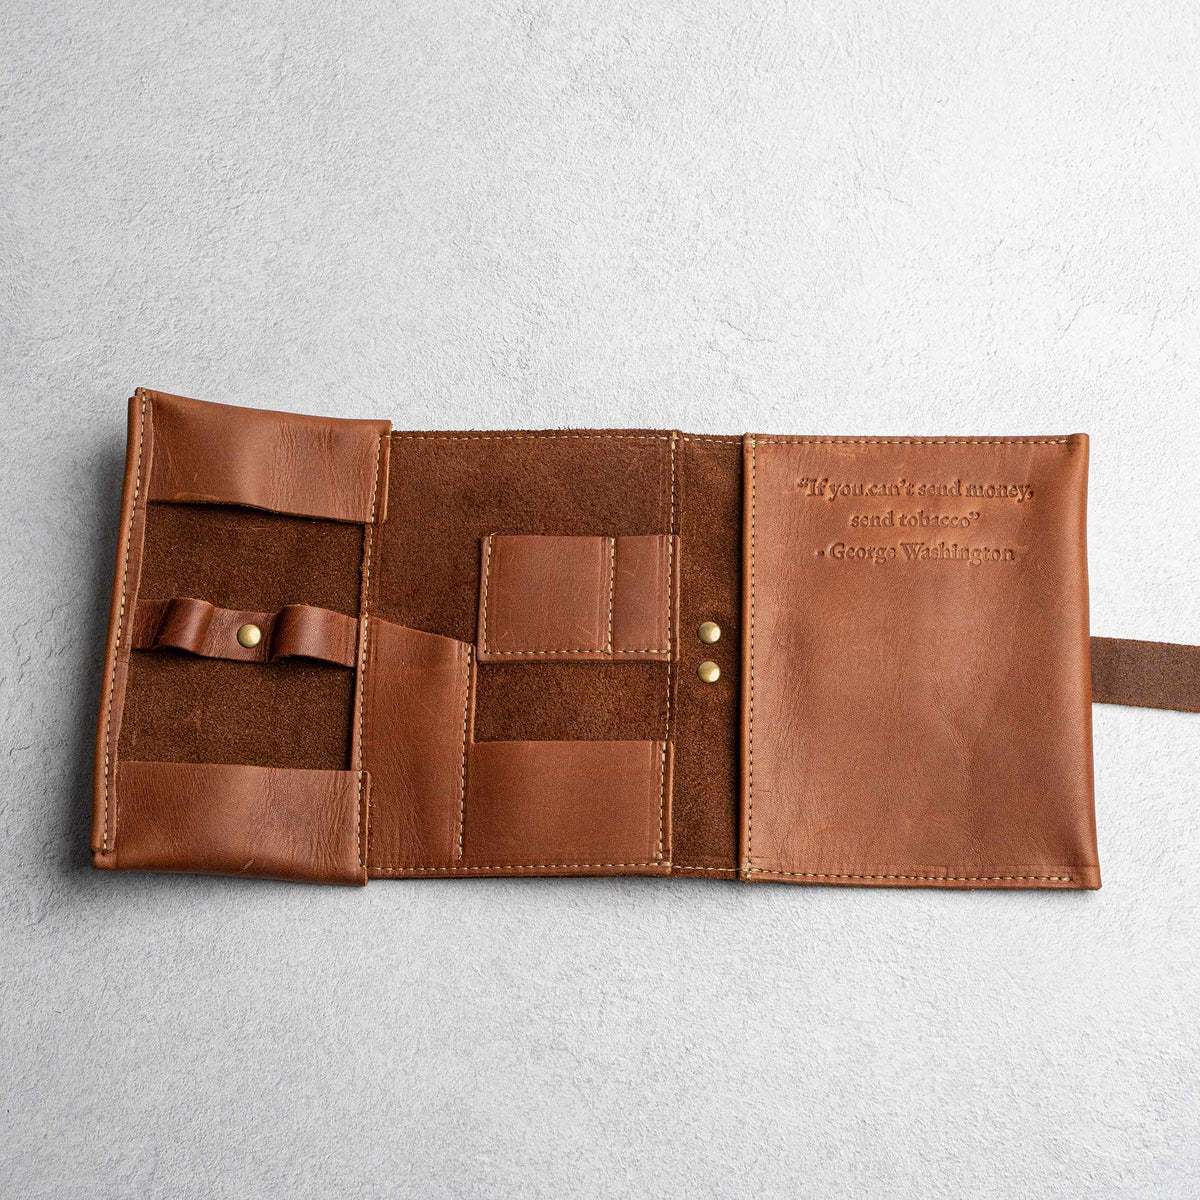 Fine leather pipe roll tobacco pouch with pockets